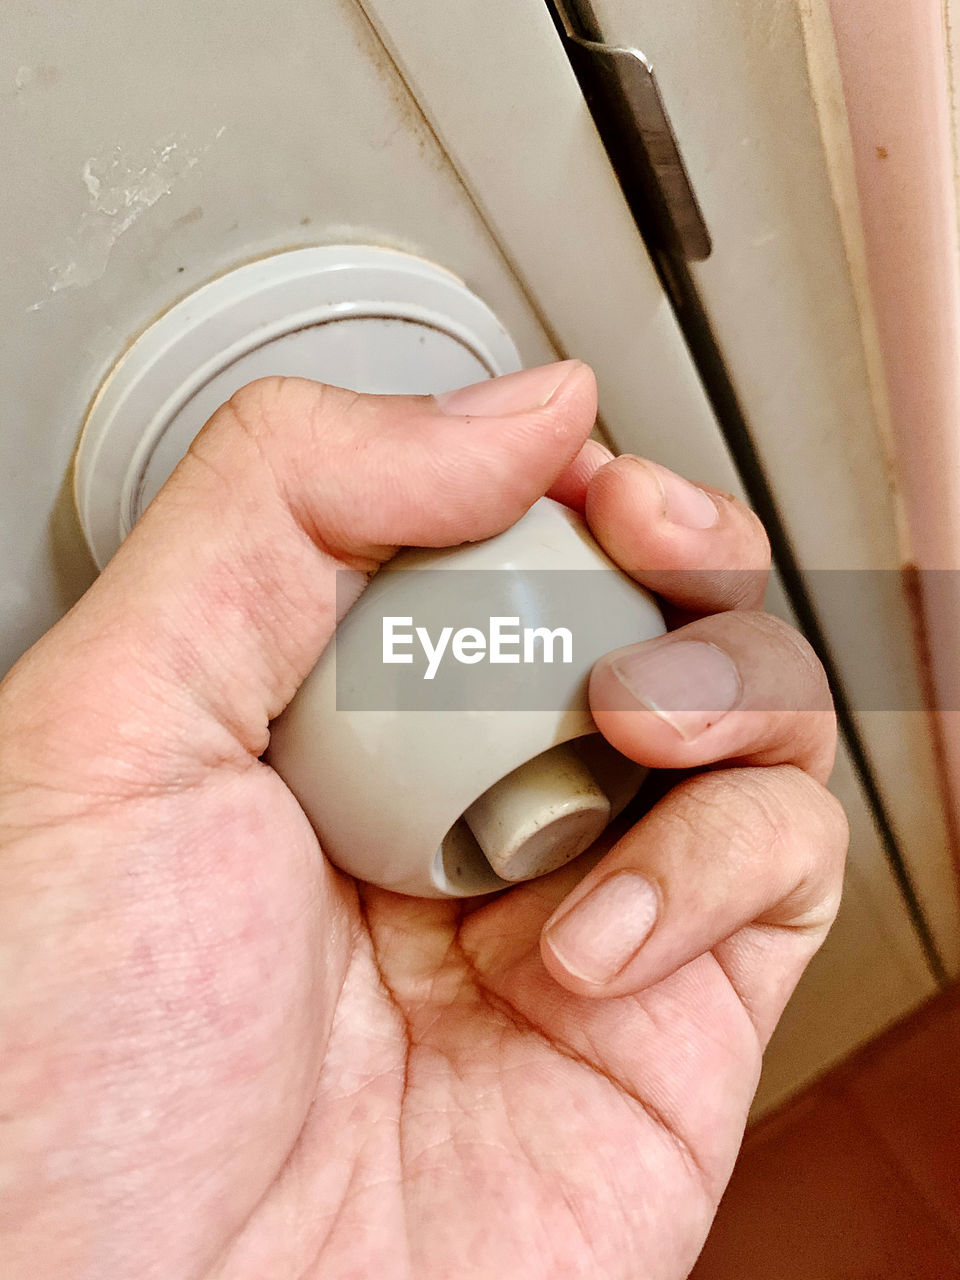 Cropped hand holding doorknob